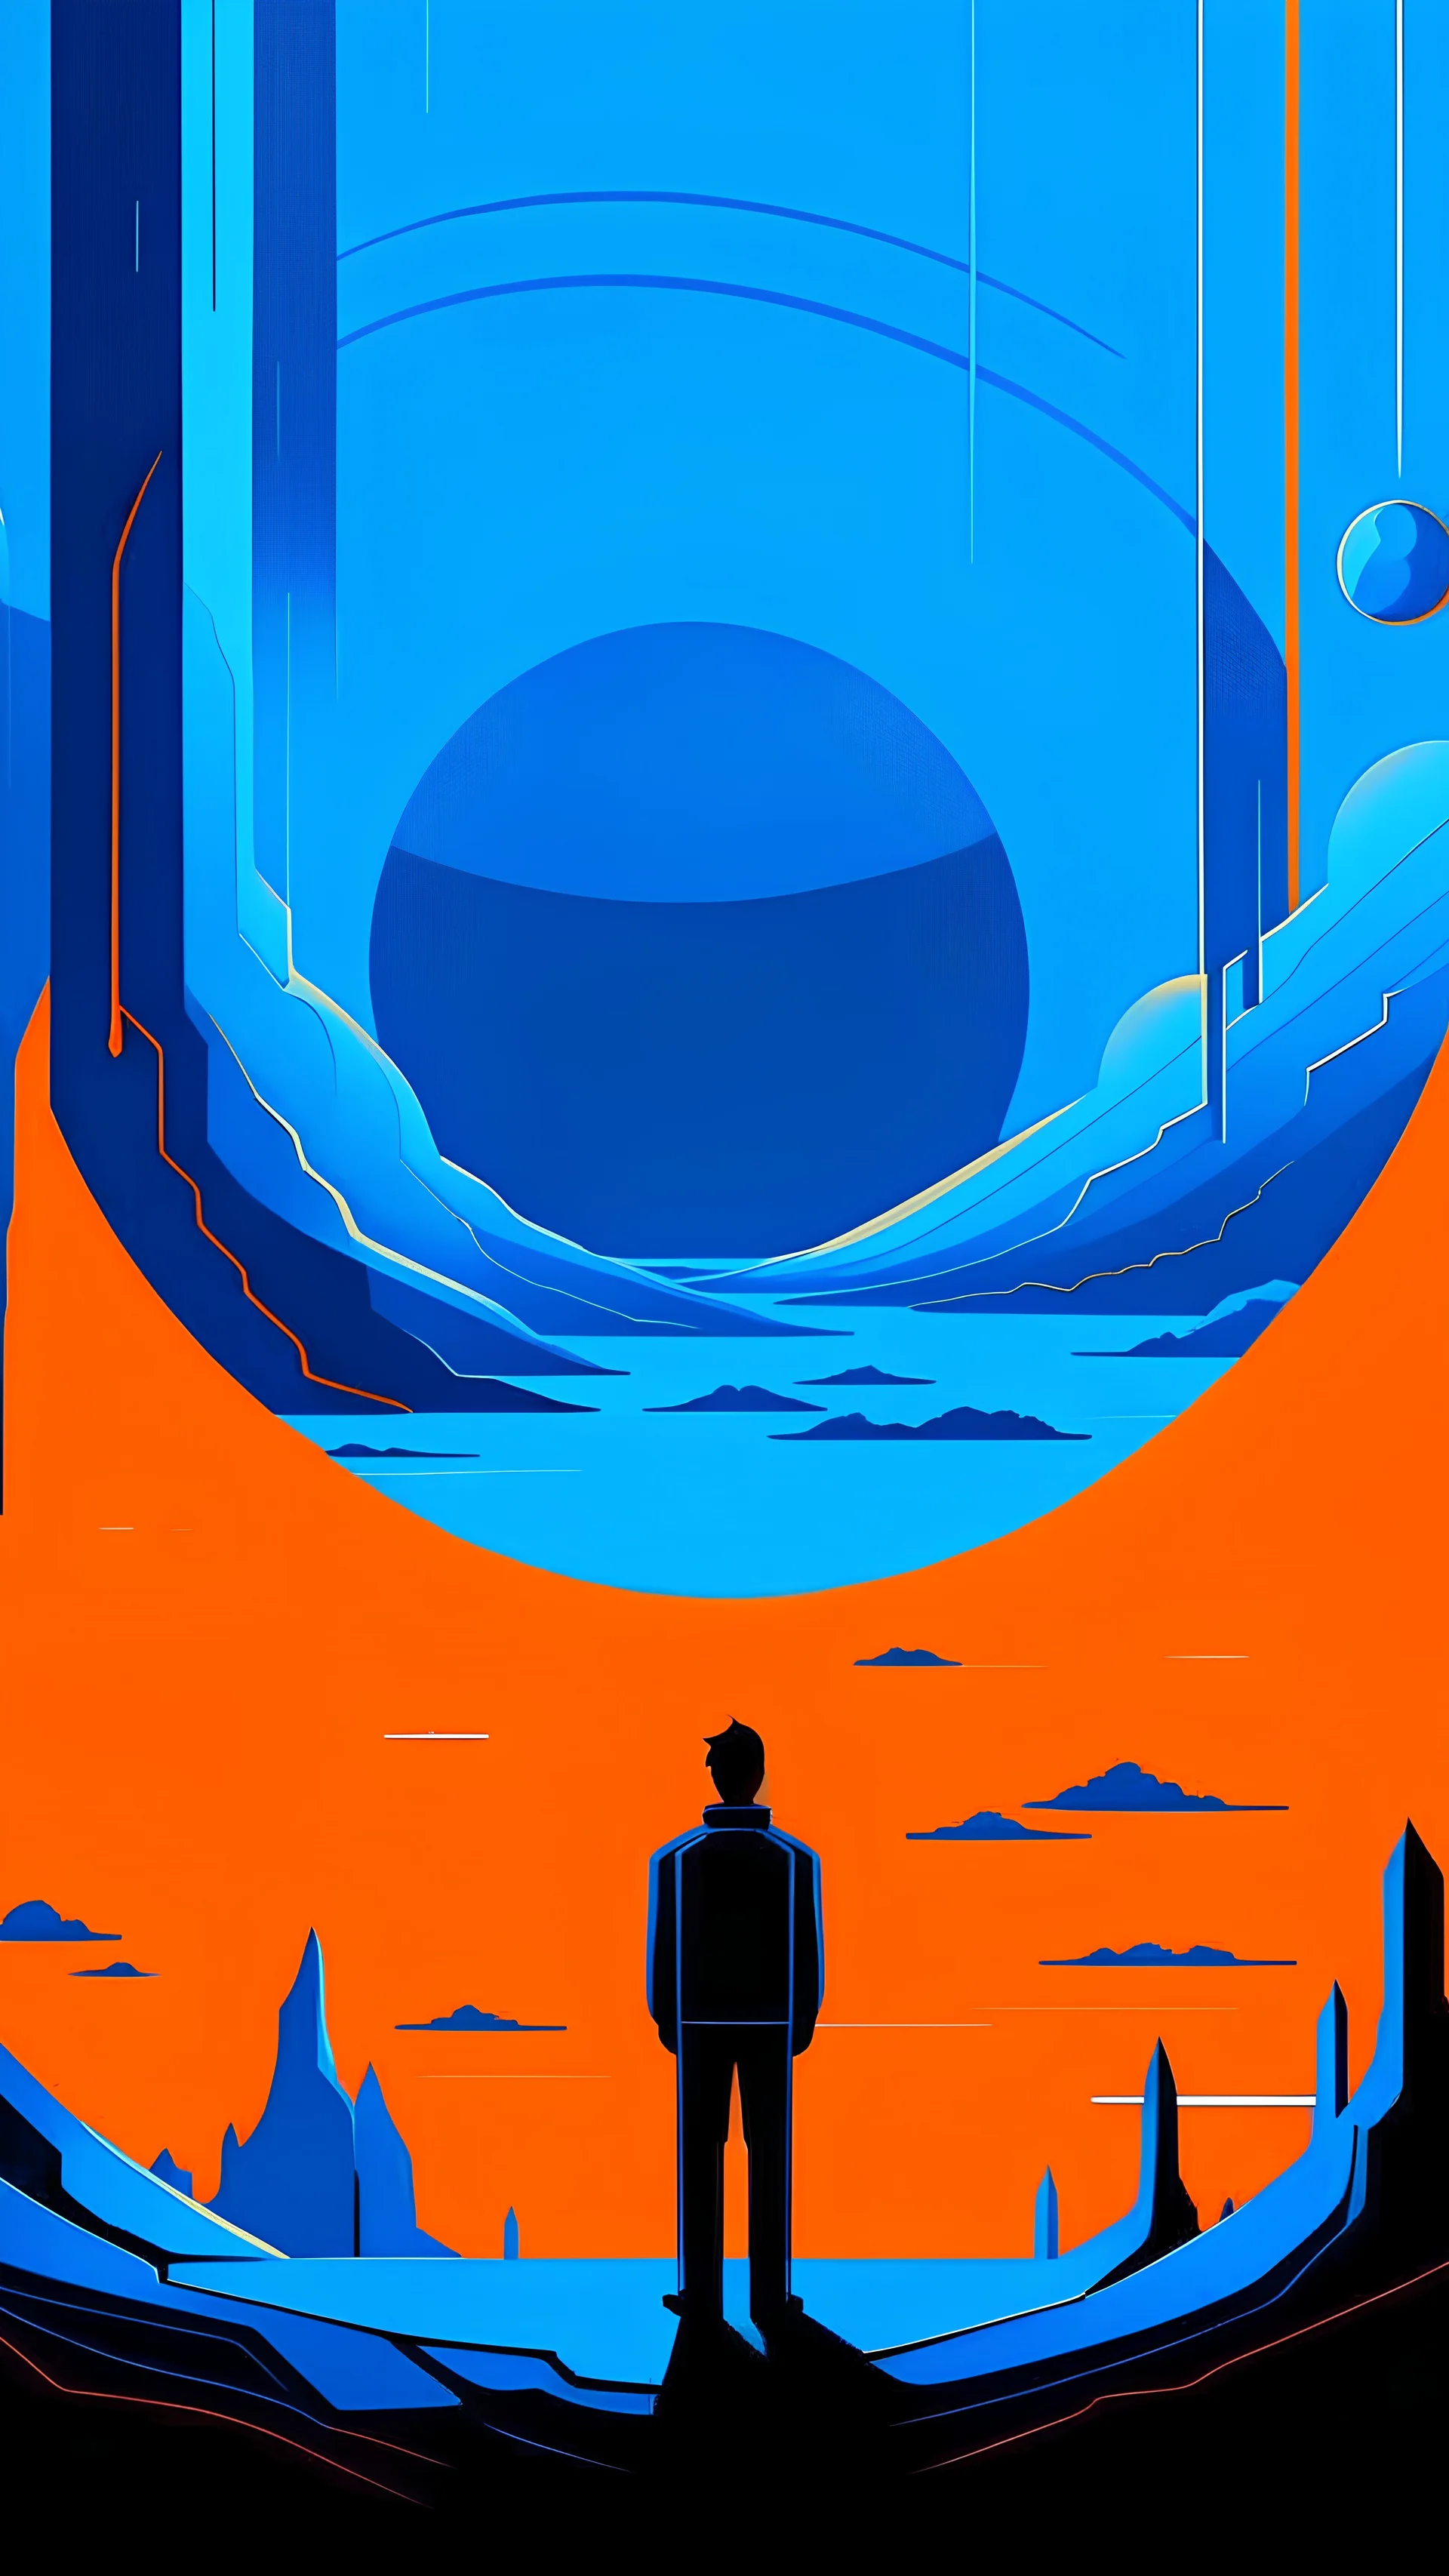 Futuristic and minimalist illustration by Miyazaki of a man surround by a digital landscape. Colors are blue and orange.